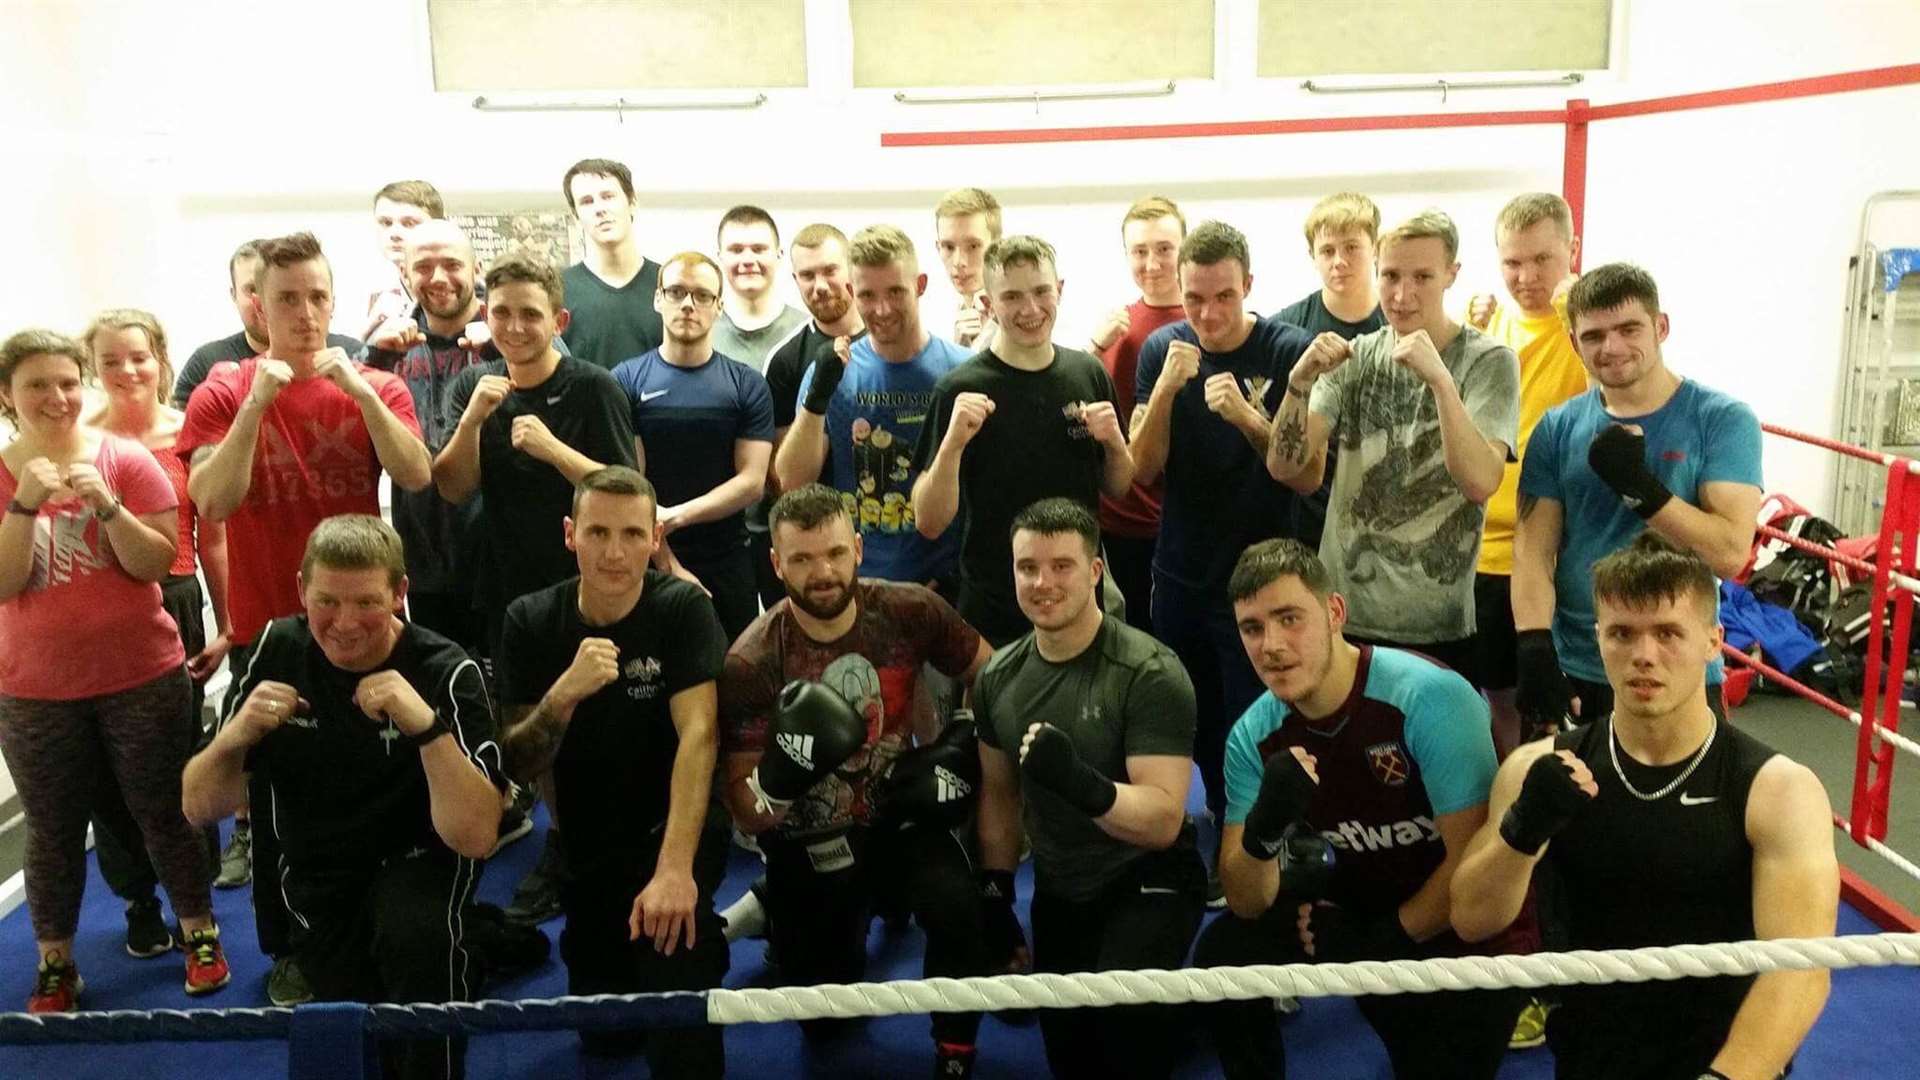 Caithness Boxing Club has around 90 members and one of its main aims is to find potential fighters to get involved at amateur boxing level.